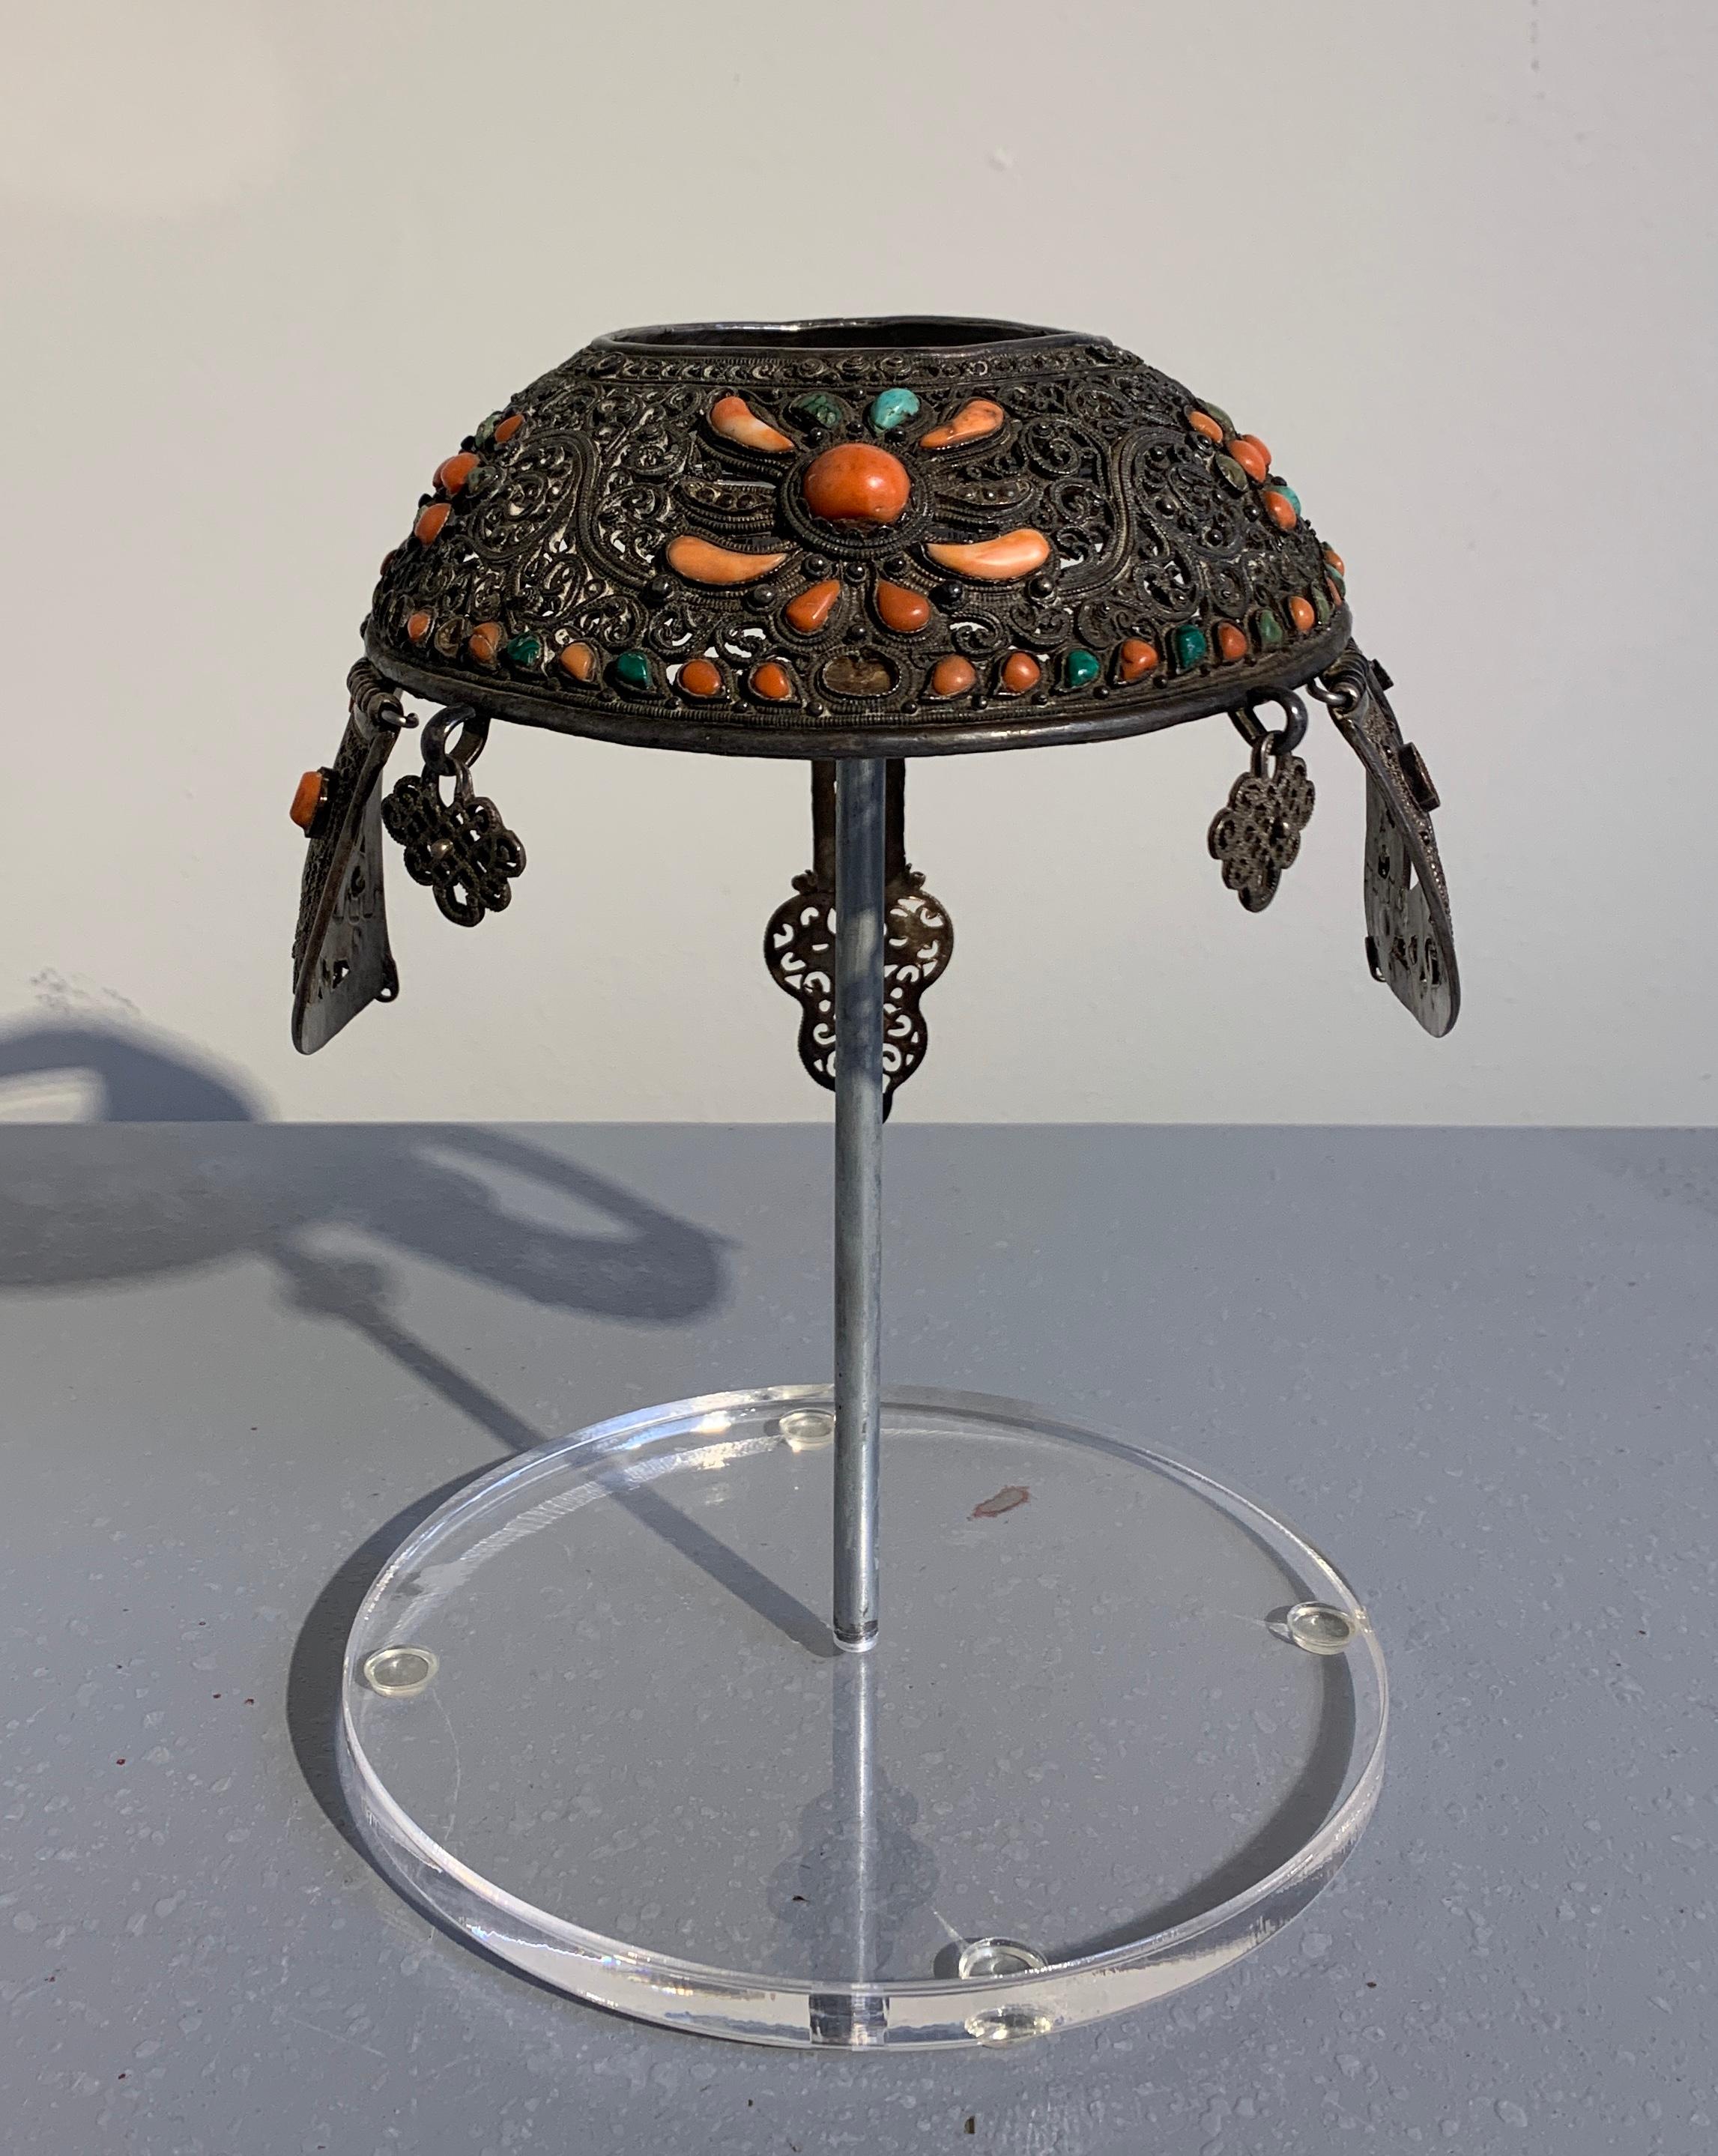 A fabulous Mongolian Khalkha silver crown headdress inset with coral, turquoise and malachite. 
The cast silver crown, of circlet form, features intricate scrolling designs set with coral, turquoise and malachite. Two small hanging pendants to the